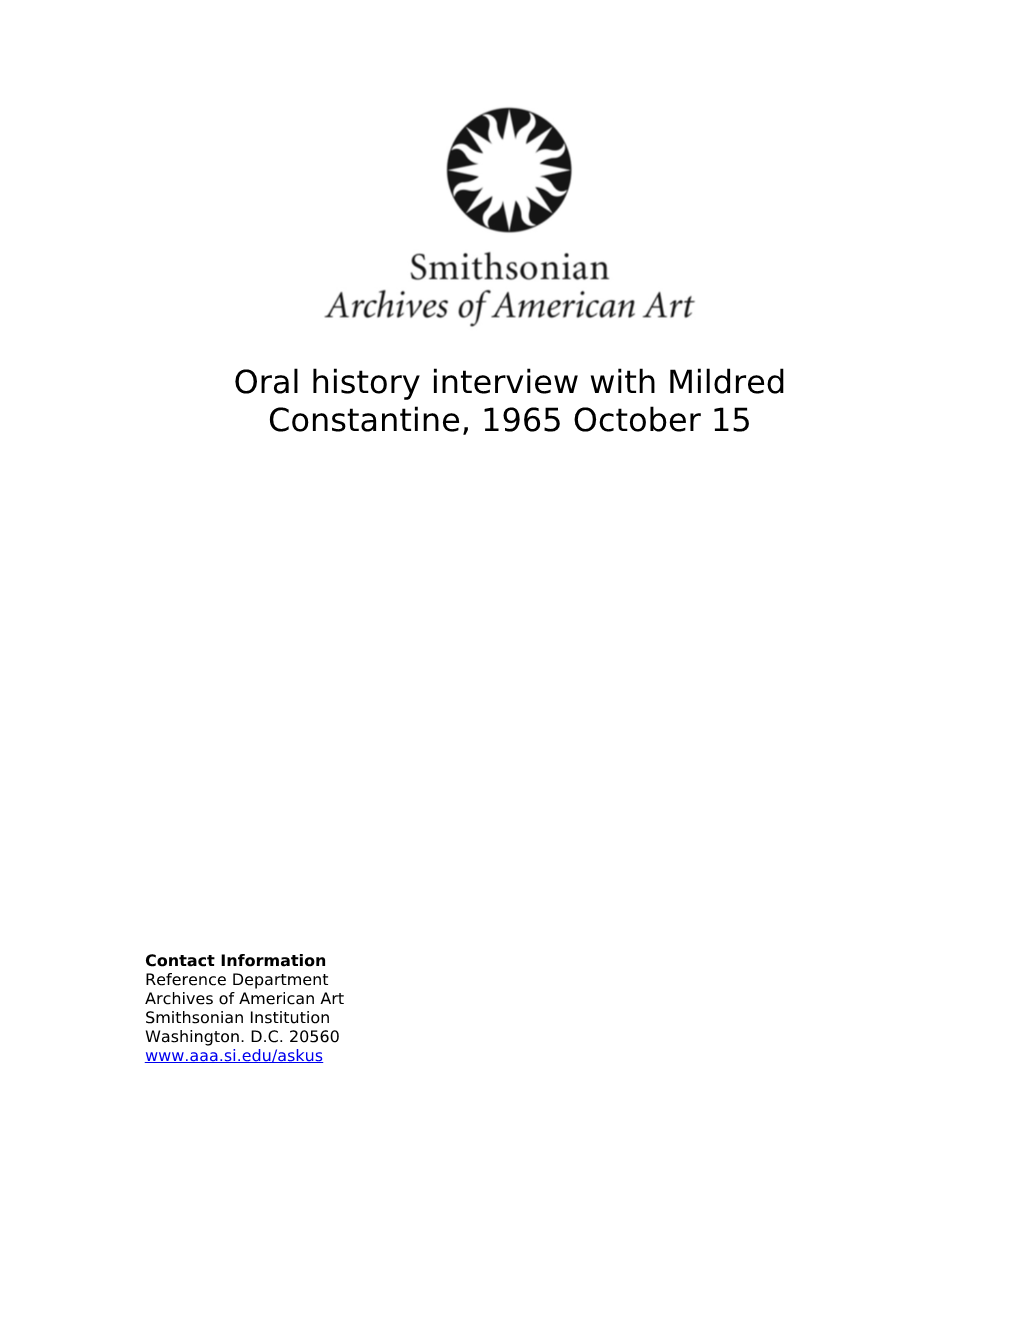 Oral History Interview with Mildred Constantine, 1965 October 15